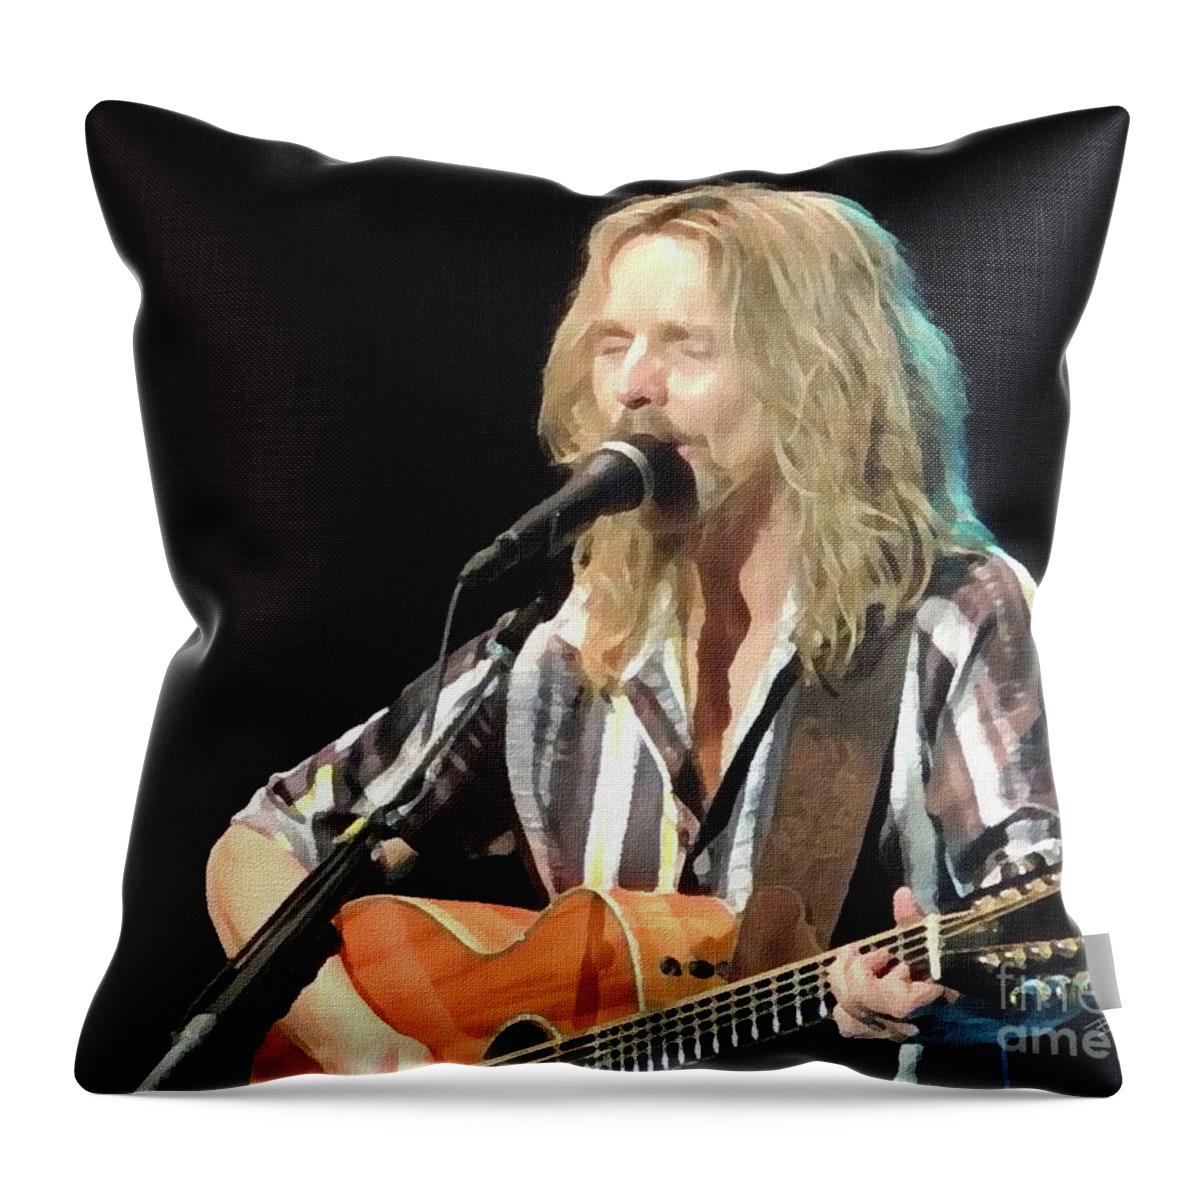 Styx Band Throw Pillow featuring the photograph Acoustic by Billy Knight